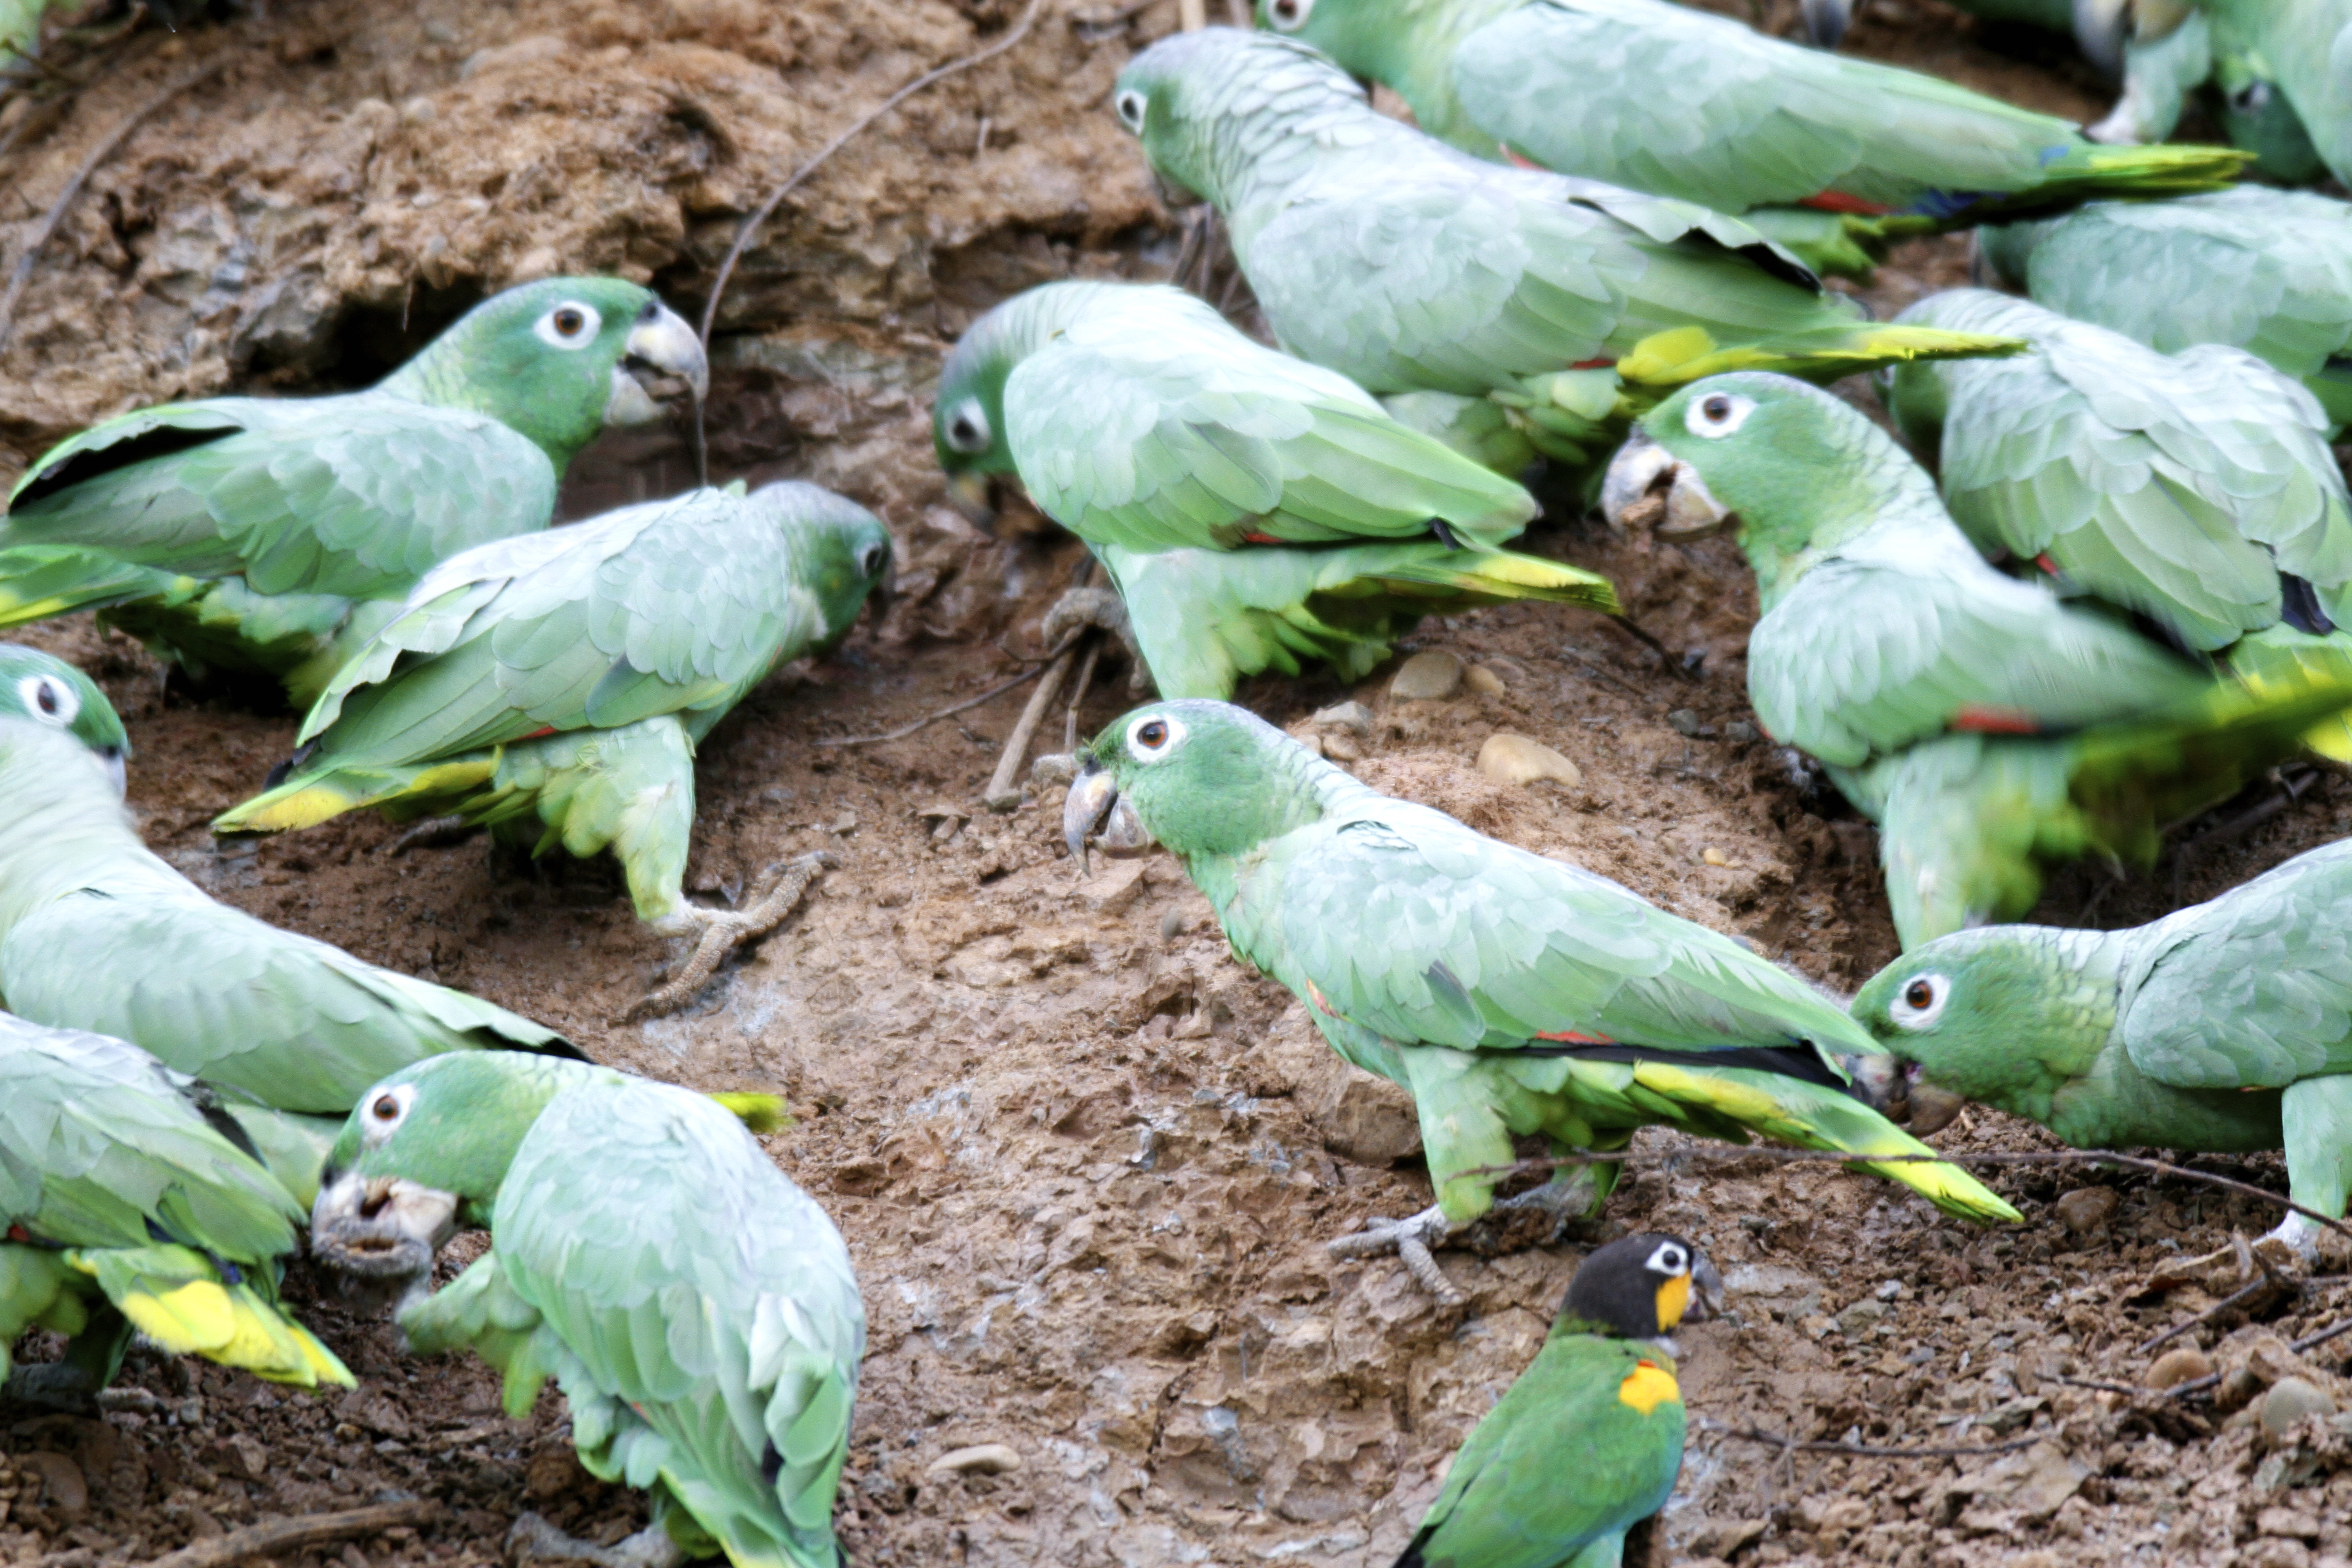 Macaw parrots feasting on clay